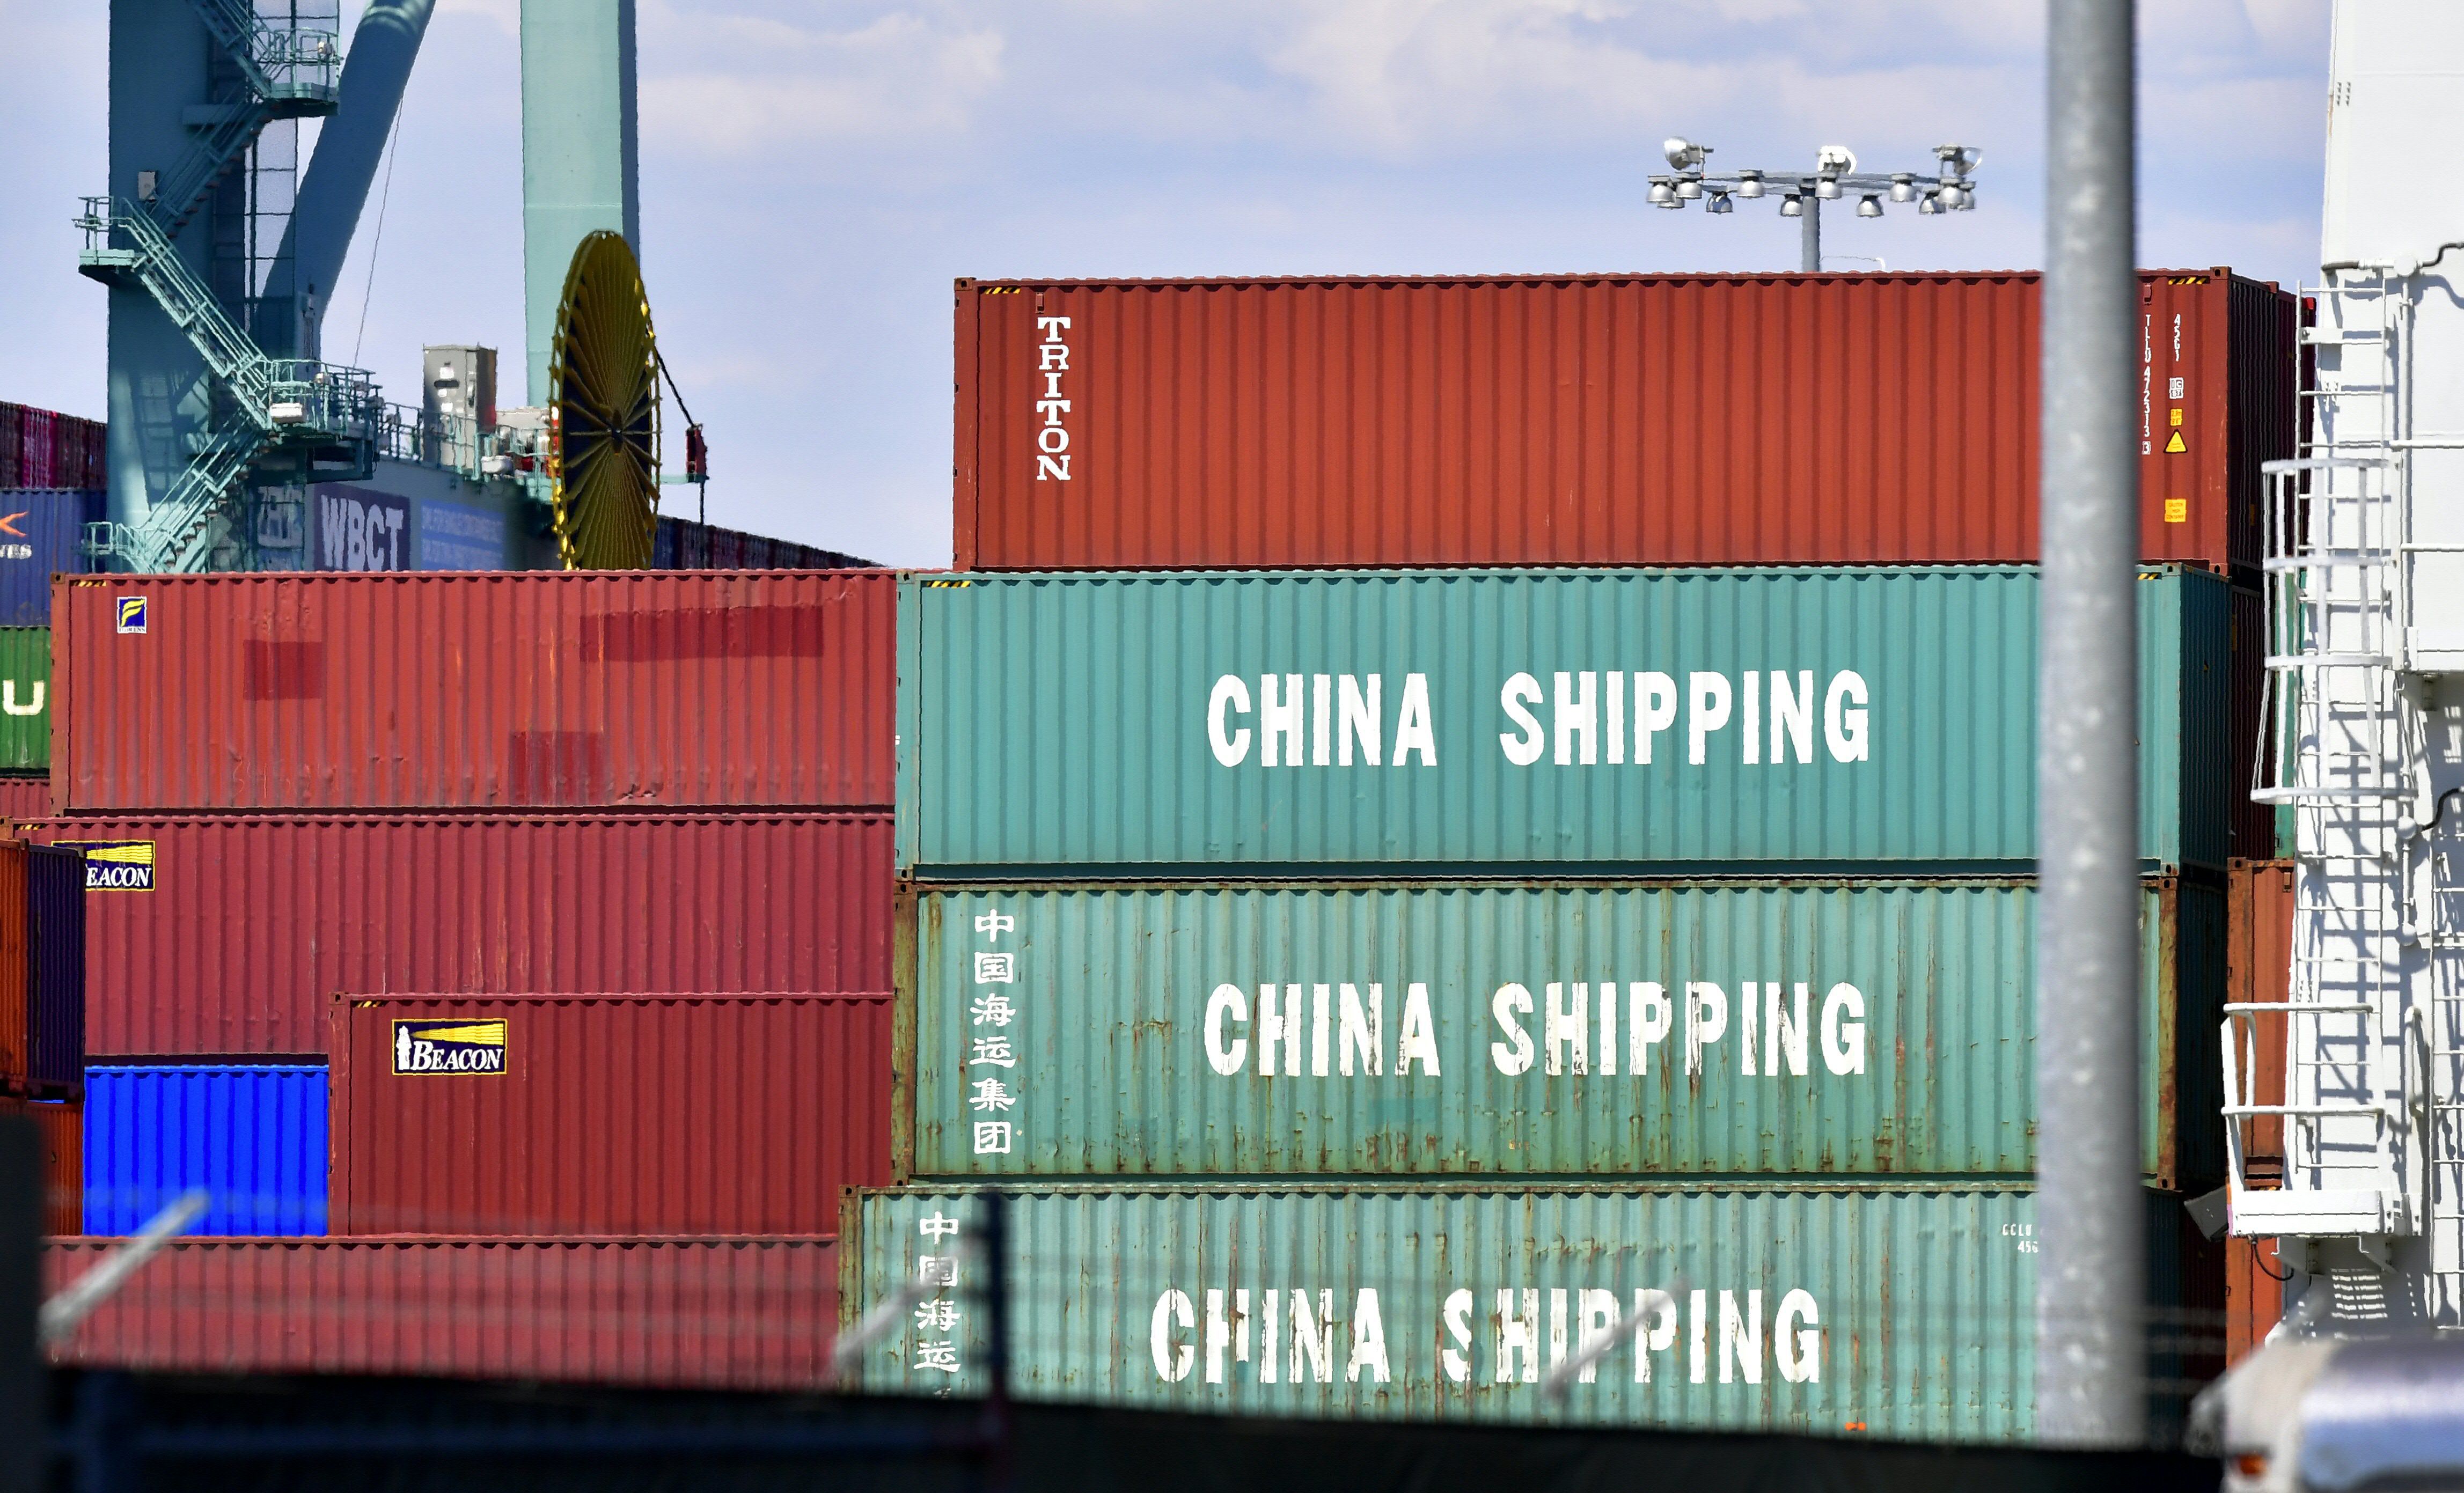 Containers in Long Beach, California on July 6, 2018, including some from China Shipping, a conglomerate under the direct administration of China's State Council.